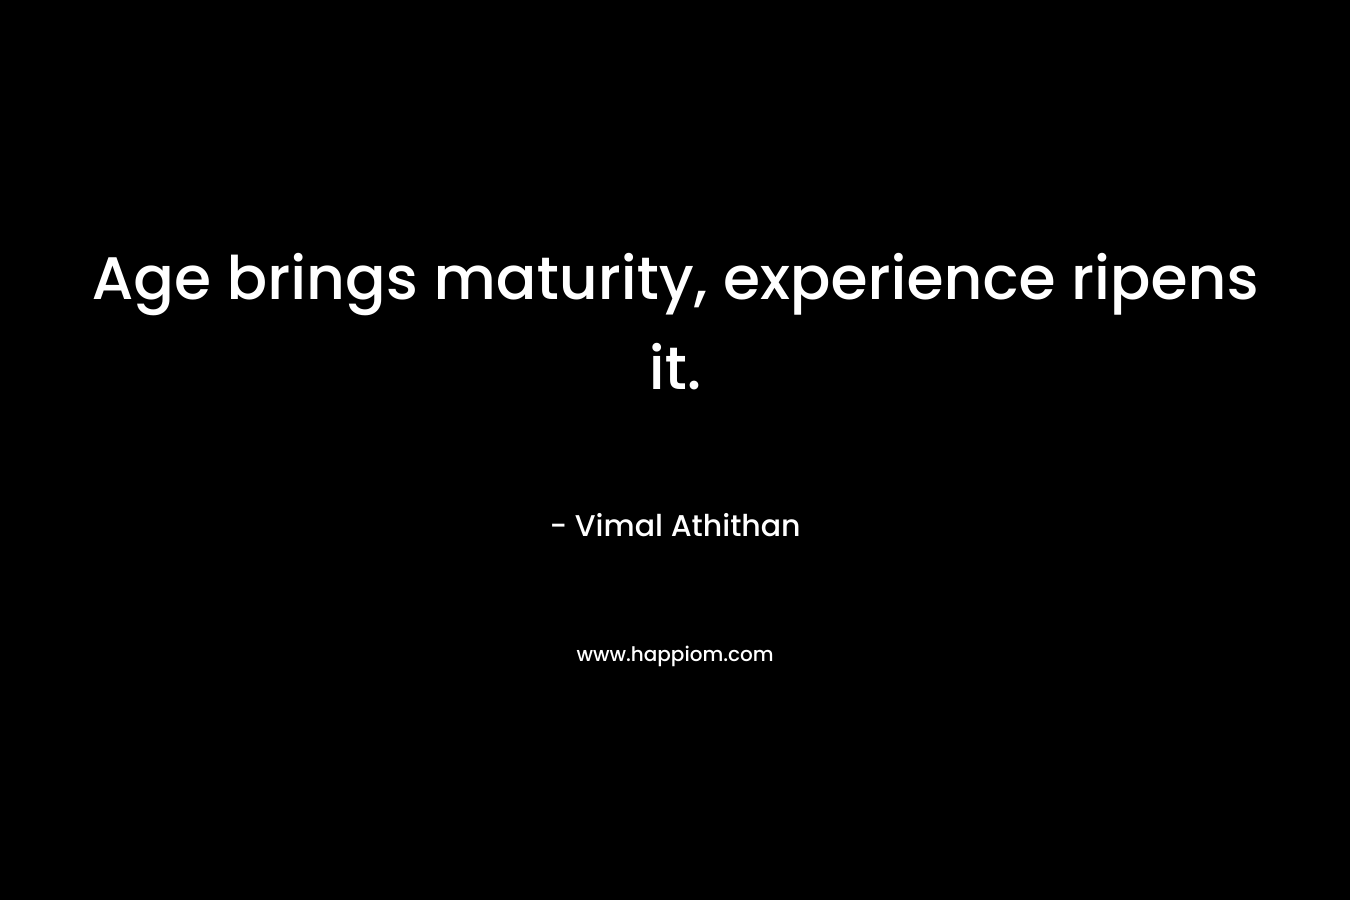 Age brings maturity, experience ripens it. – Vimal Athithan